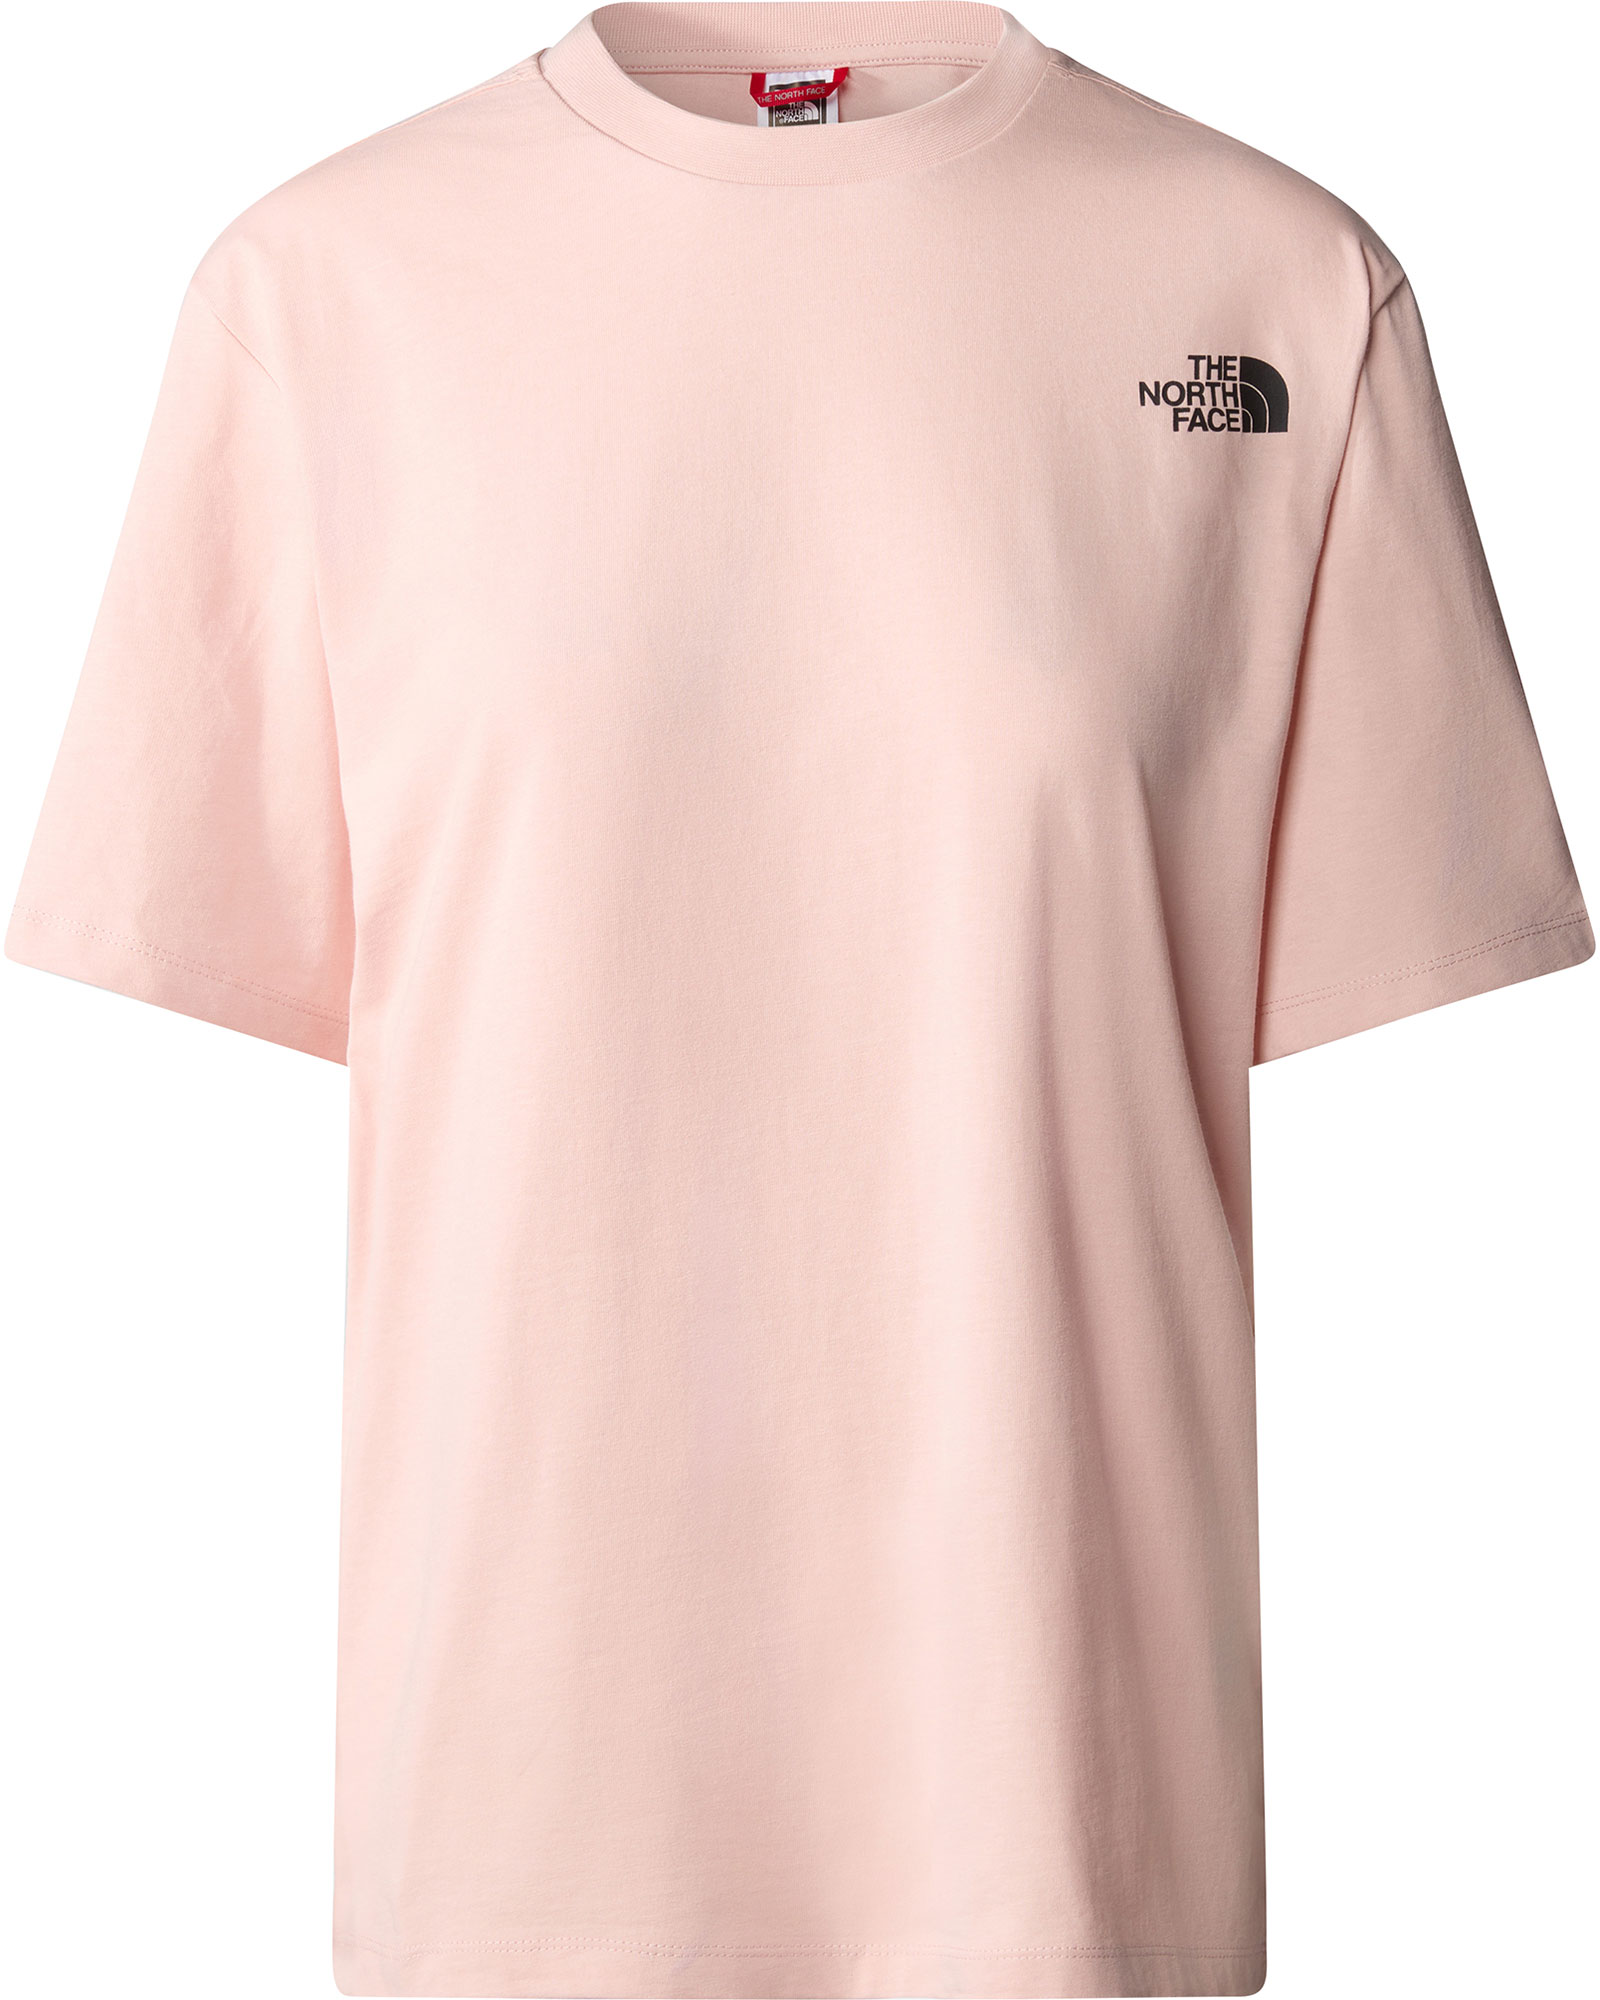 The North Face Relaxed Redbox Women’s T Shirt - Pink Moss L